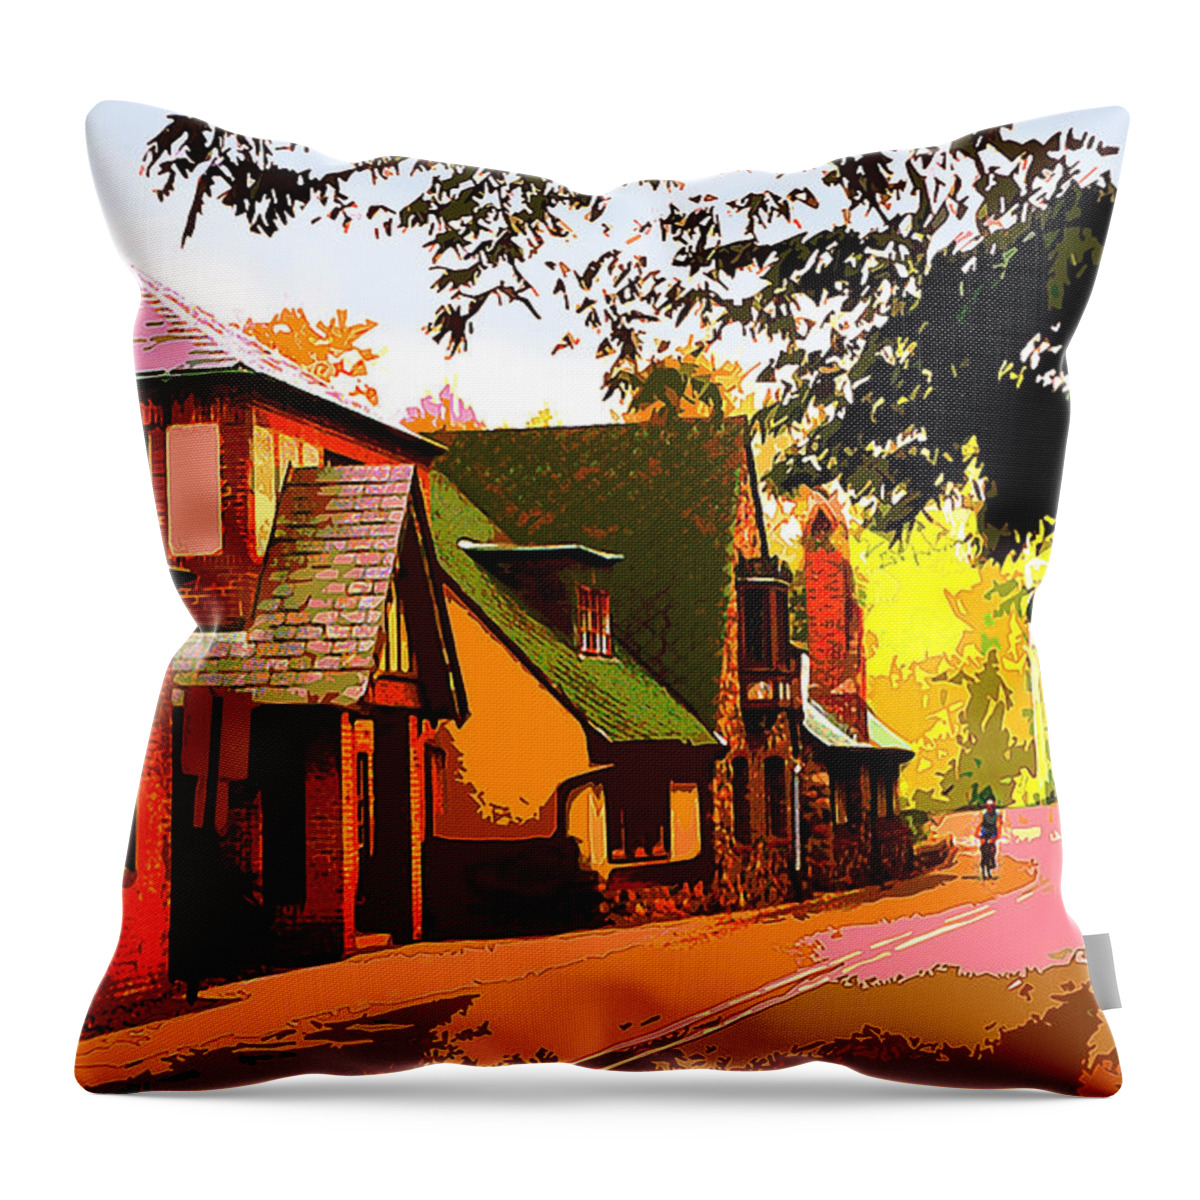 Cityscape Throw Pillow featuring the painting A Bicyclist on English Lane by CHAZ Daugherty